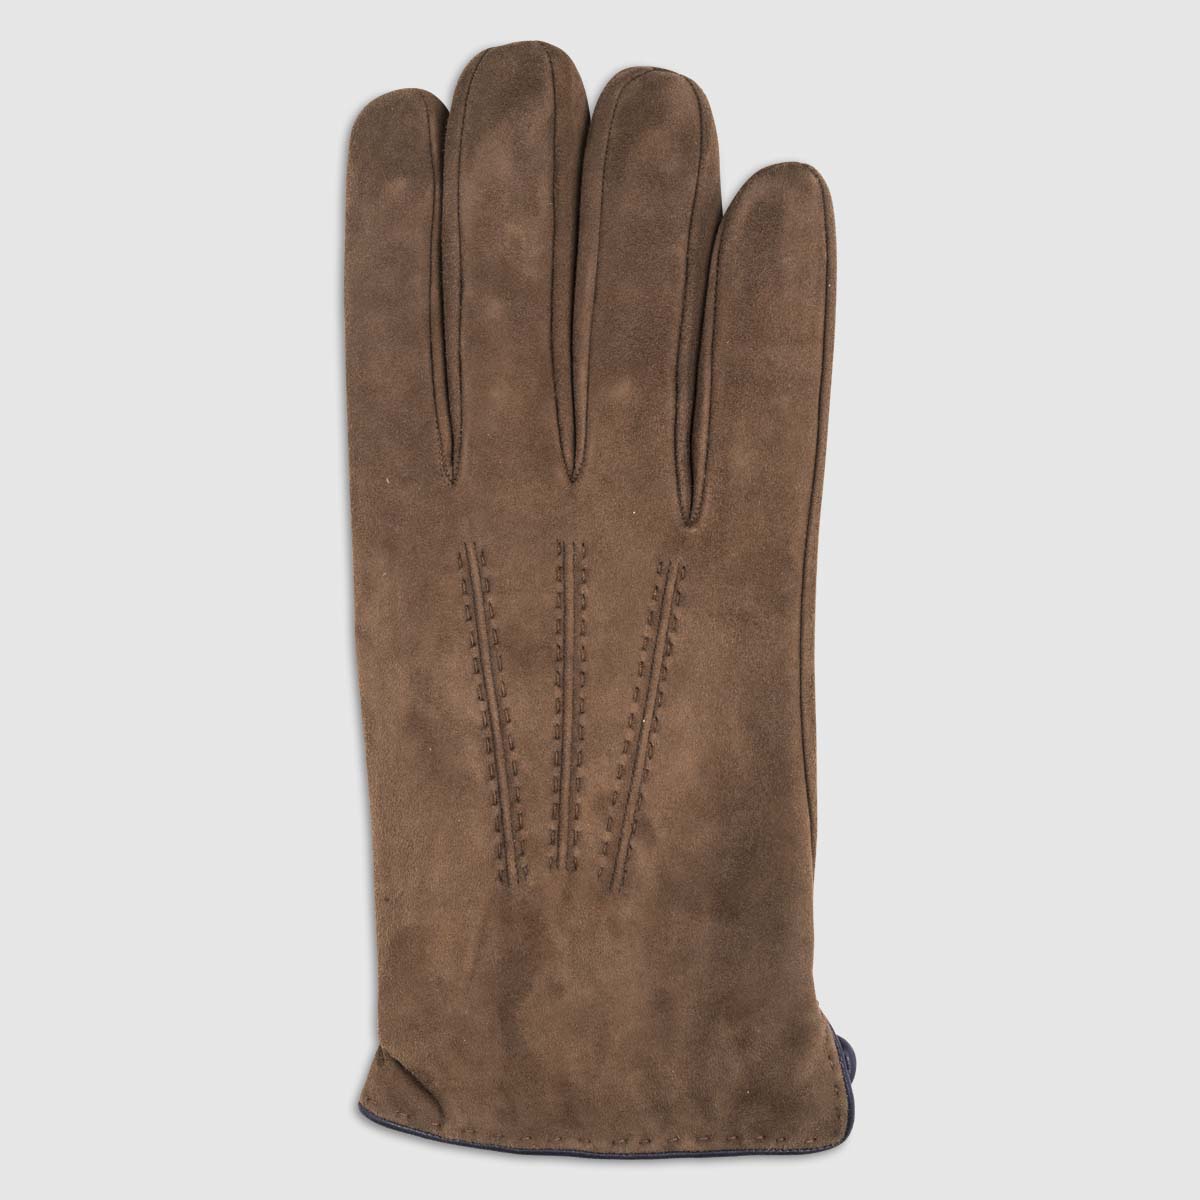 Suede Glove with Cashmere Lining in Cigar & Blue – 8.5